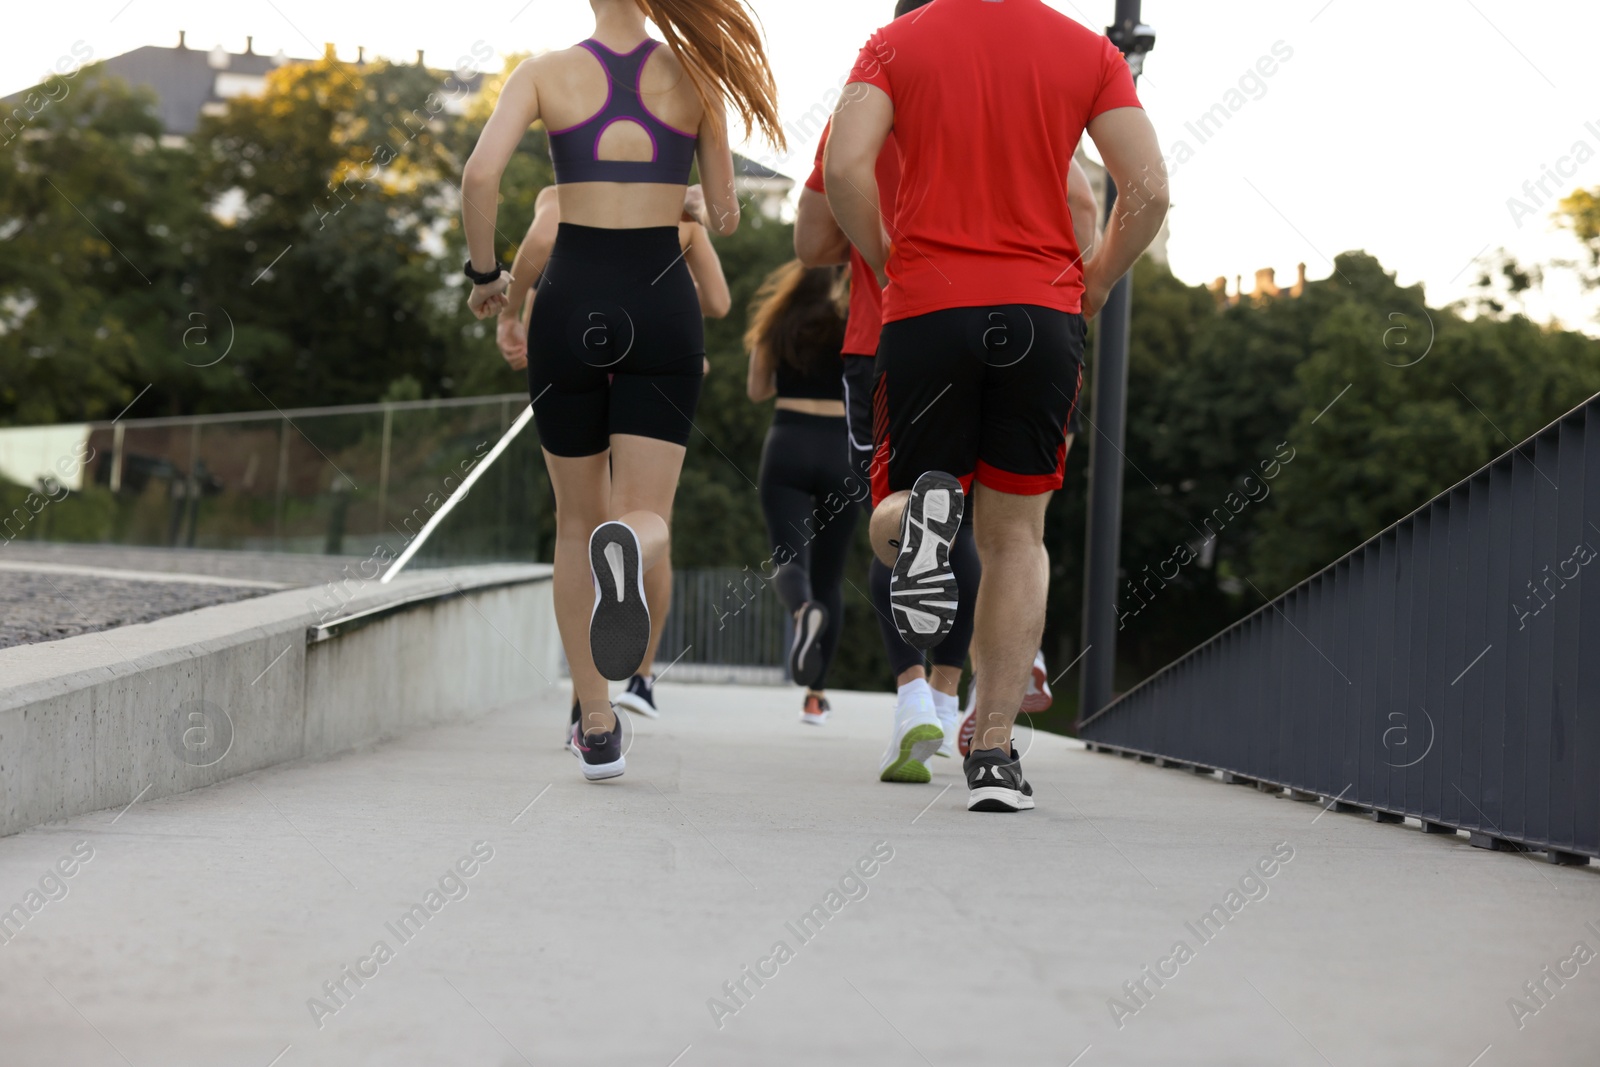 Photo of Group of people running outdoors, back view